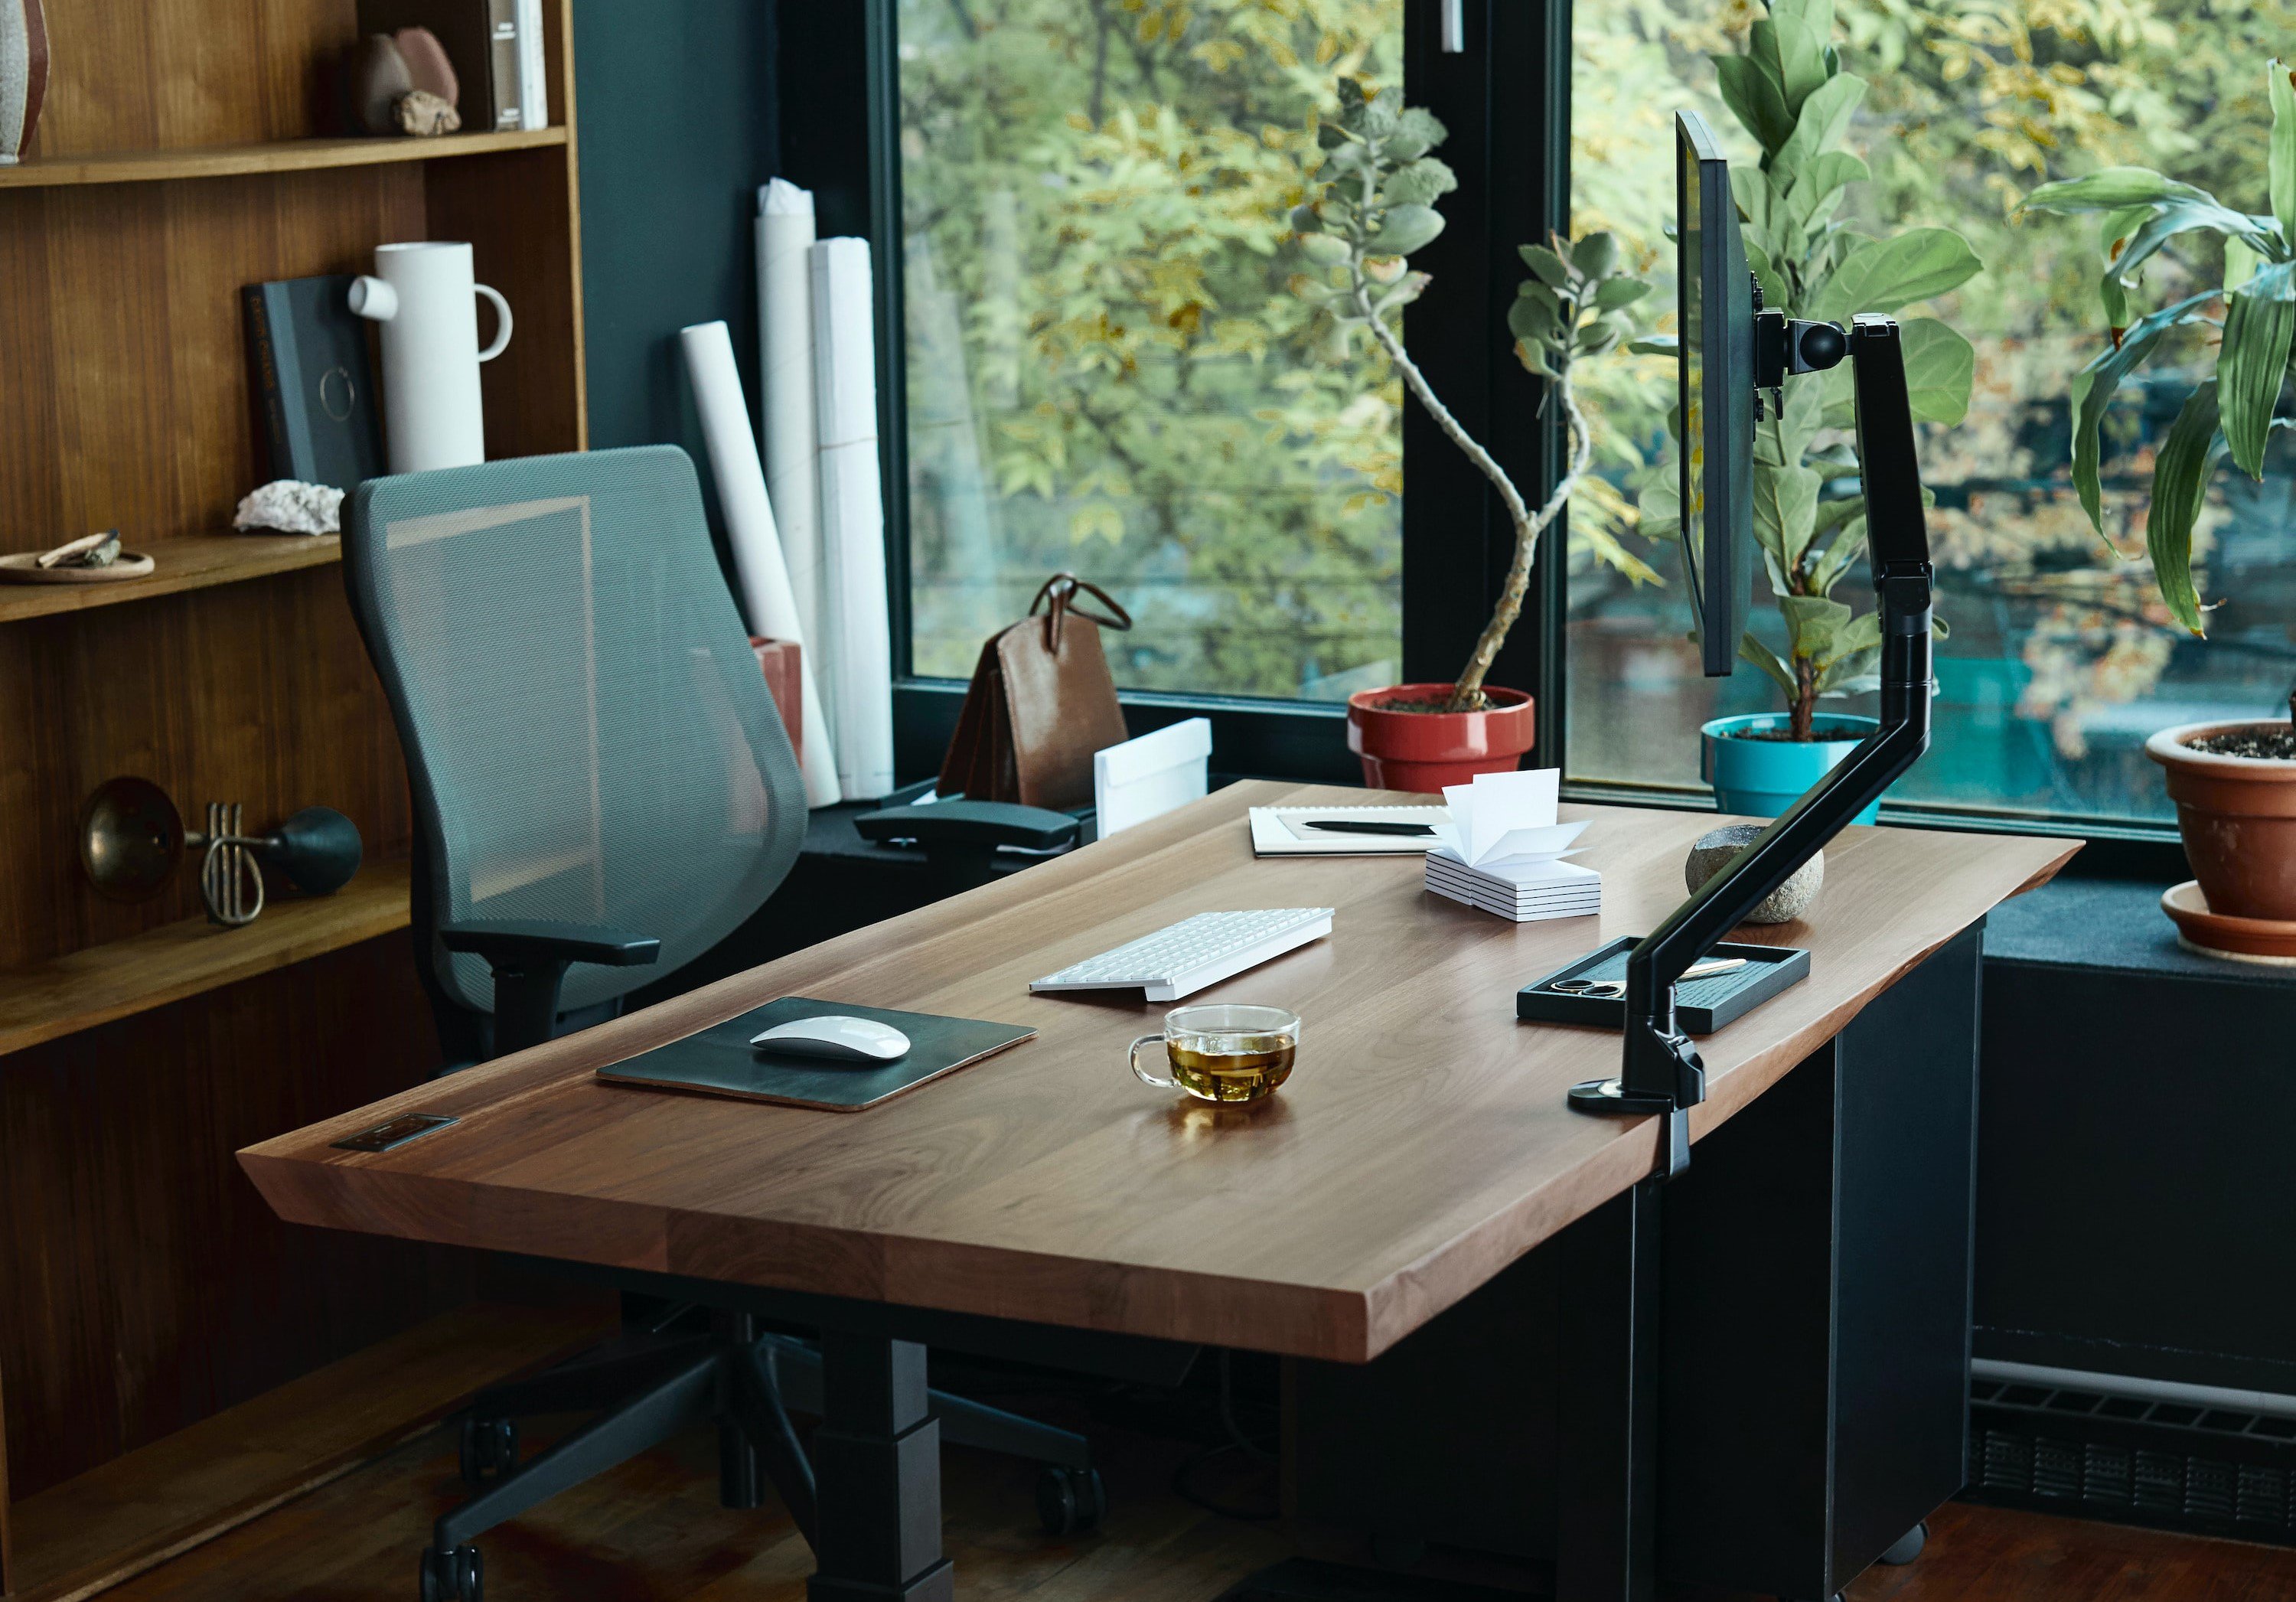 Five quick tips for improving your home office setup with lamps, ergonomic chairs, monitors, adjustable desks, and accessories. 